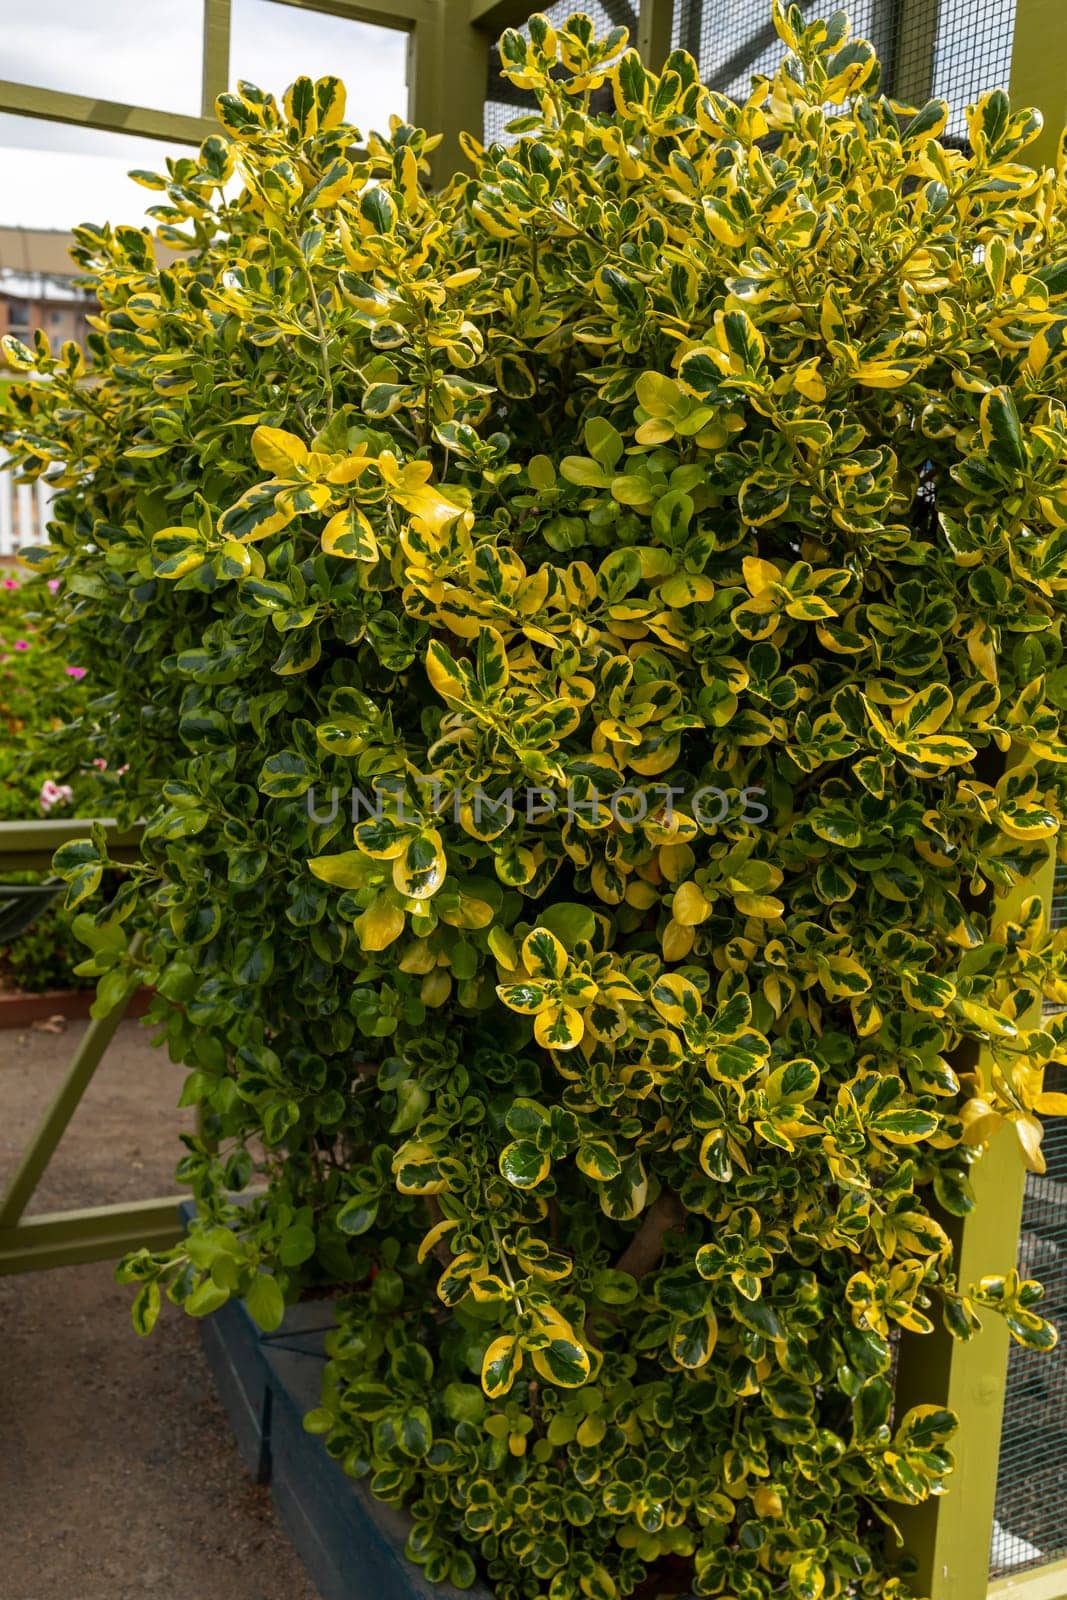 Closeup Evergreen Shrub Golden Euonymus With Green, Gold Variegated Foliage in Outdoors on Backyard. Evonymo Plant, Small Spindle Tree. Vertical Plane. Floriculture, Greenhouse by netatsi